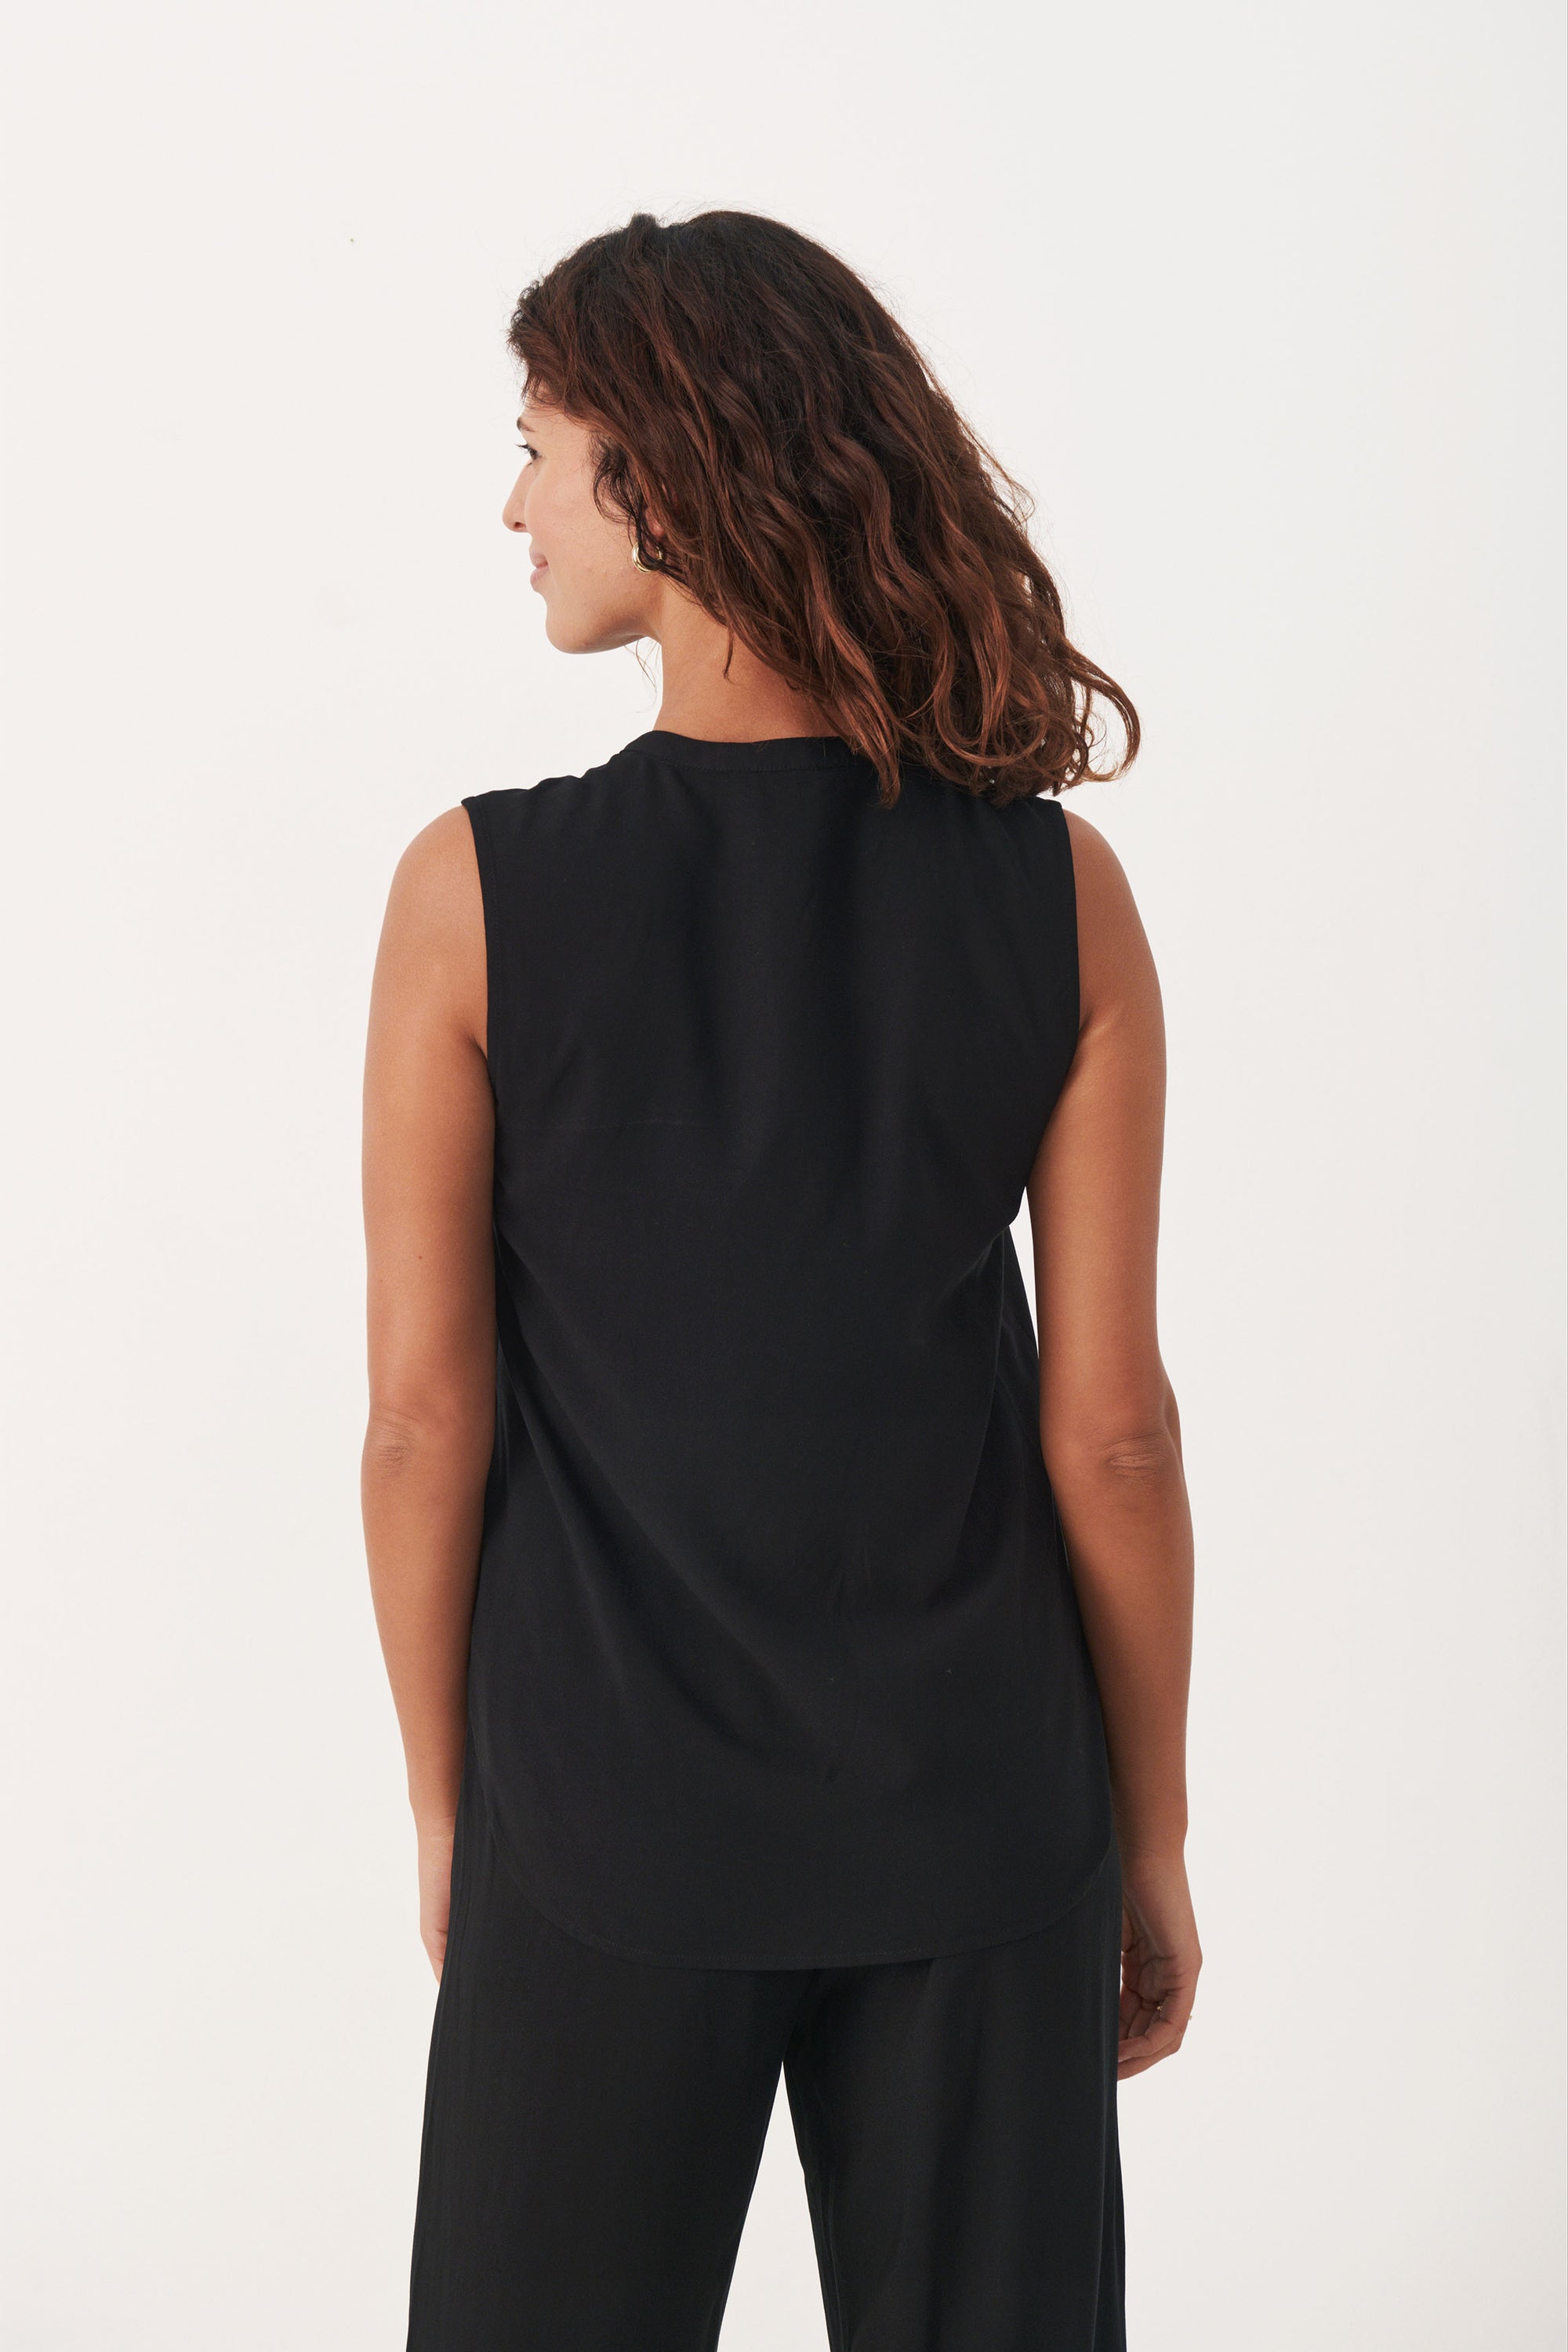 Andia top black - Part Two